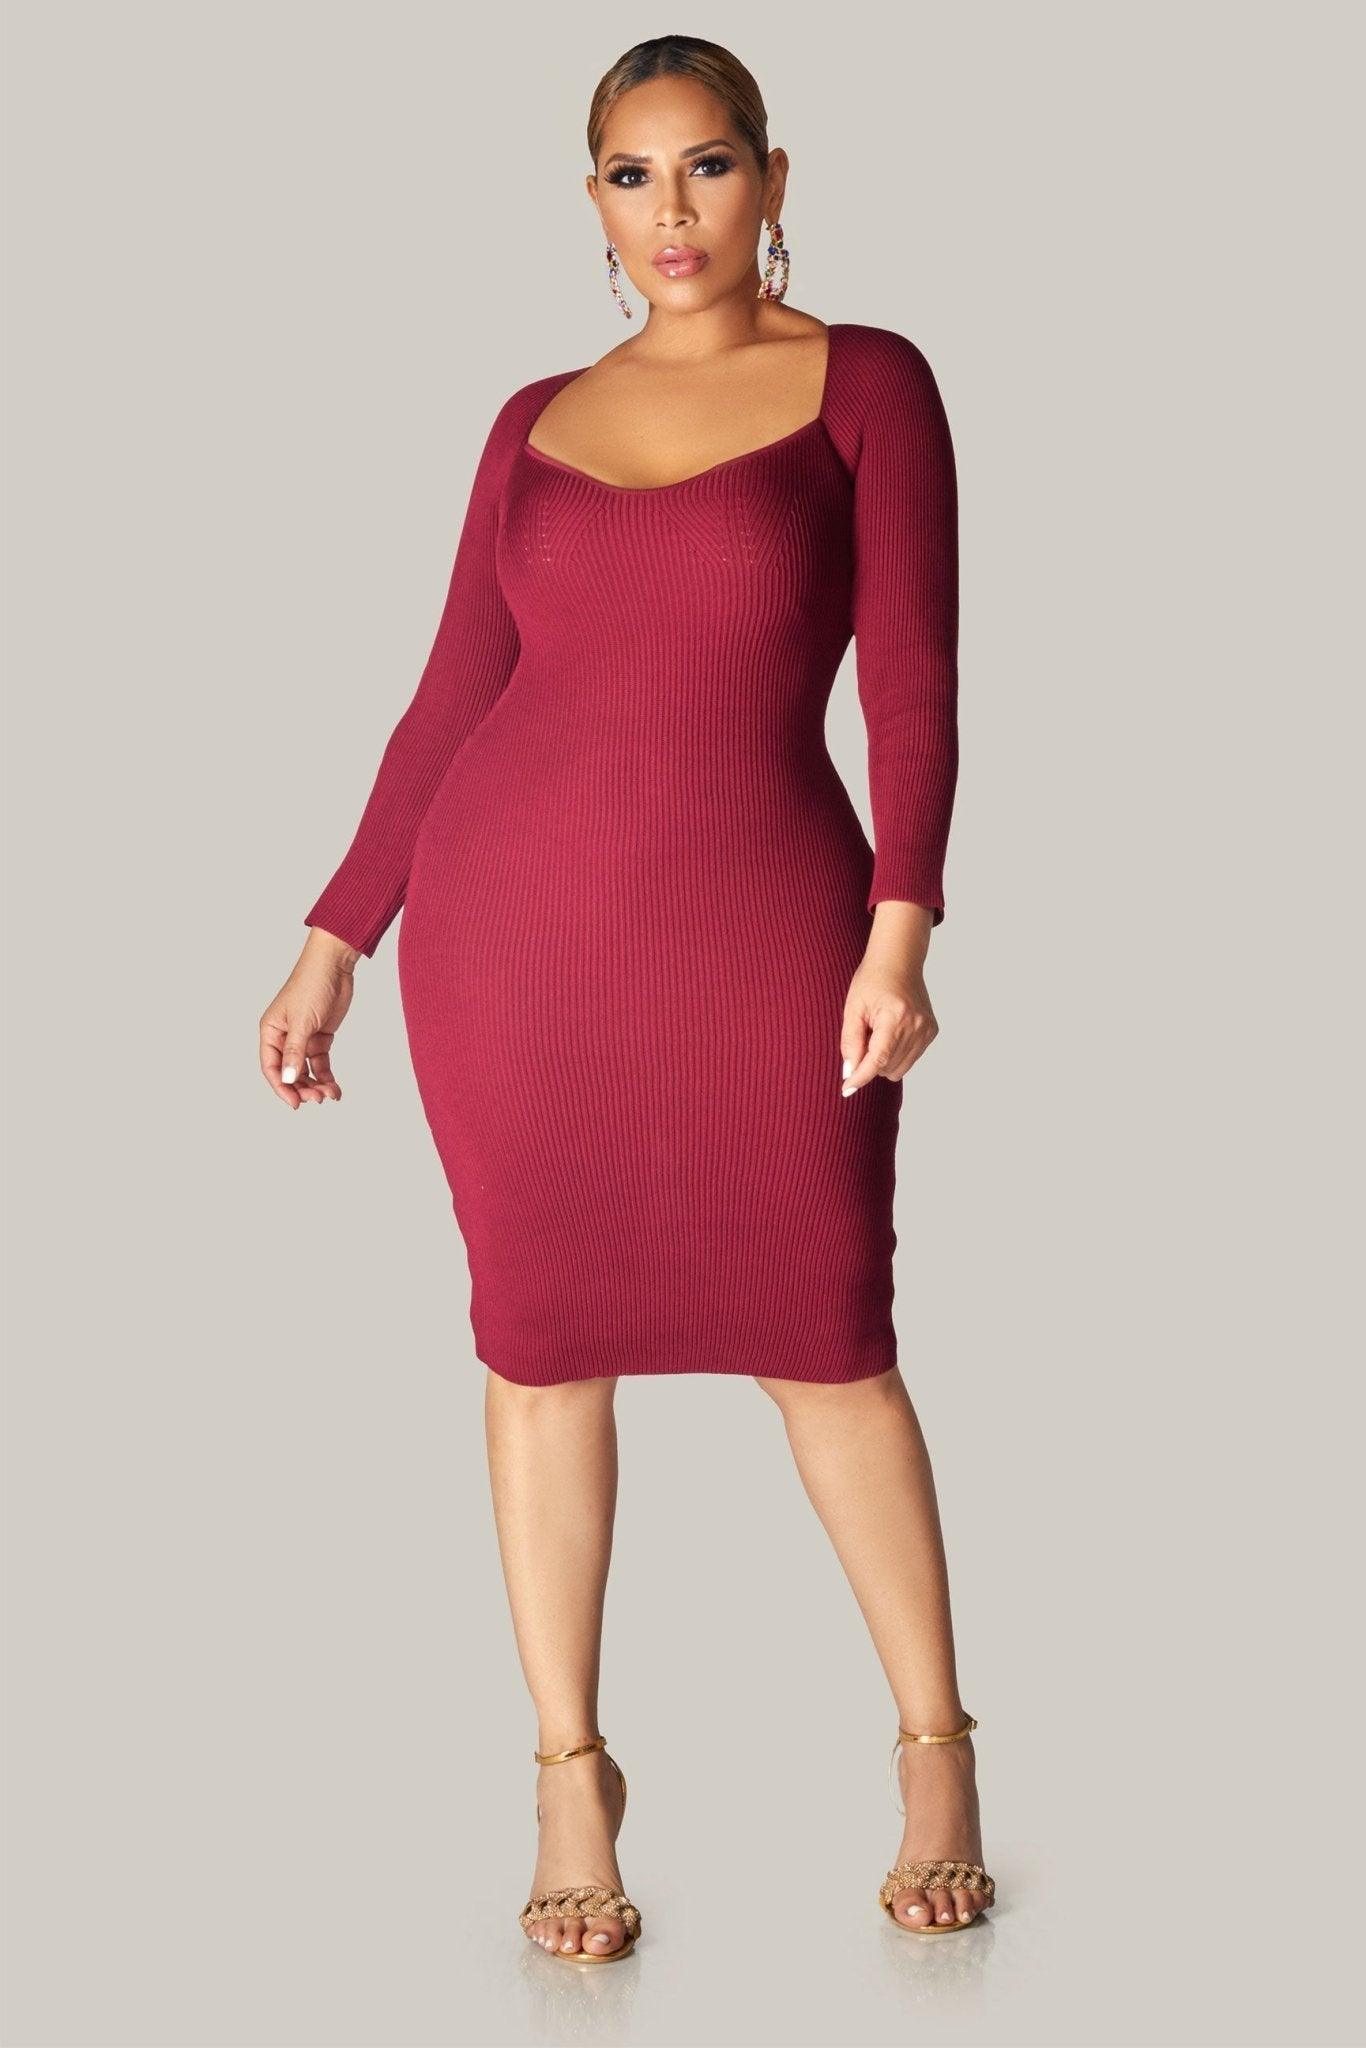 Falling For Her Long Sleeves Dress - MY SEXY STYLES